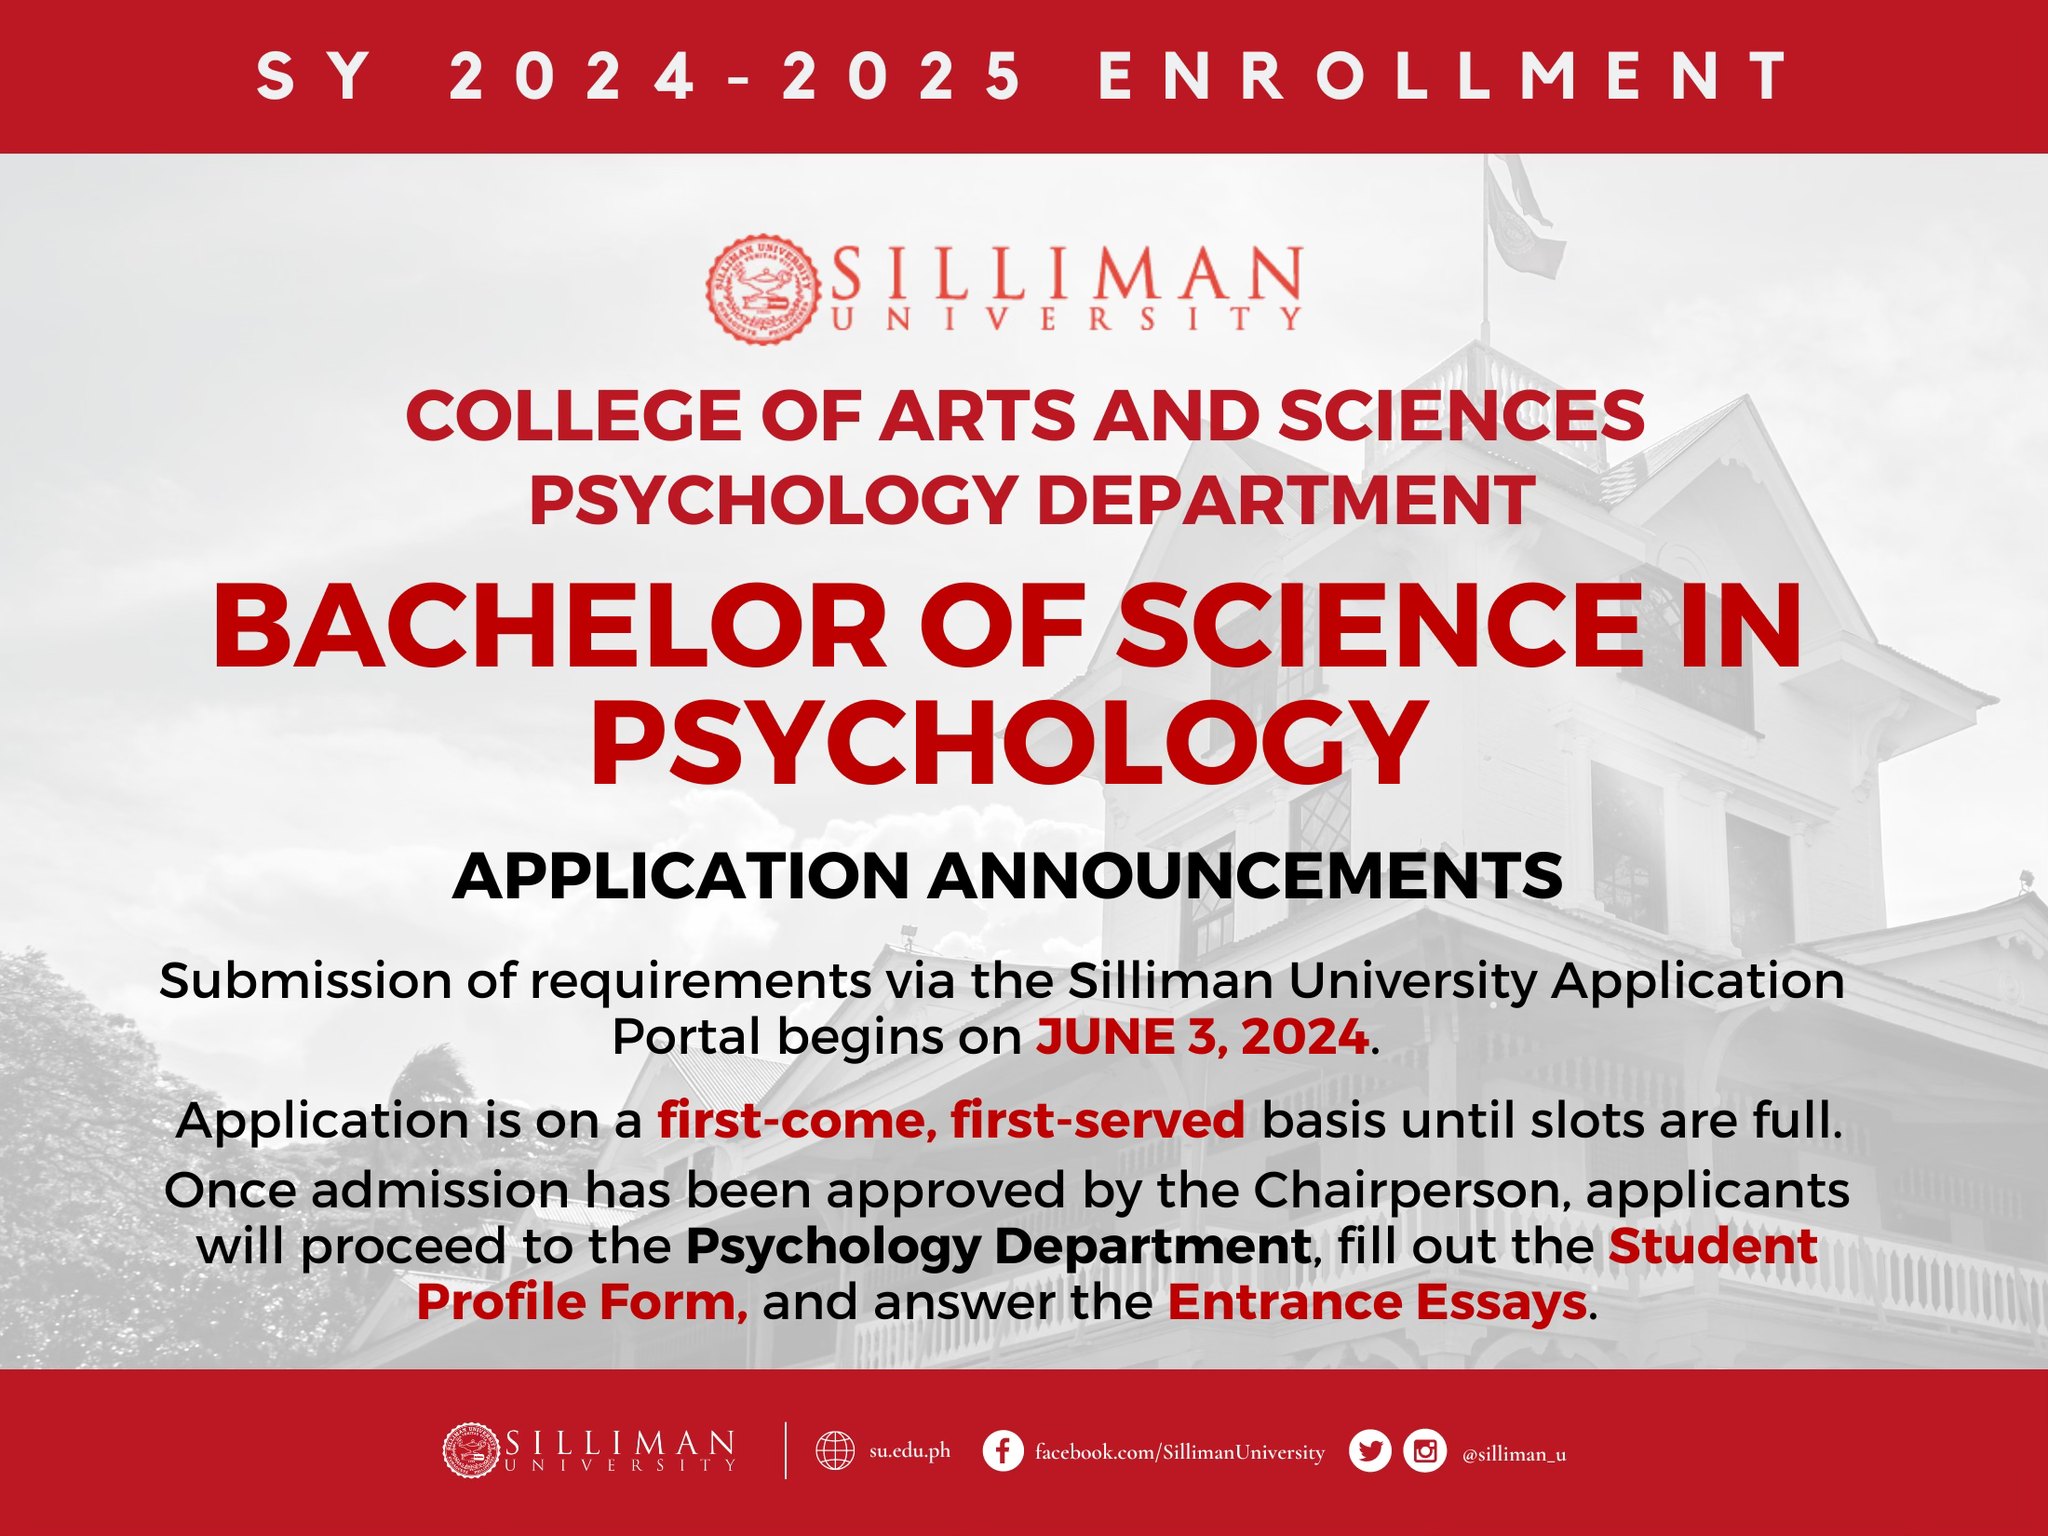 College of Arts and Sciences – Psychology Department is calling all interested first-year applicants to APPLY to its Bachelor of Science in Psychology